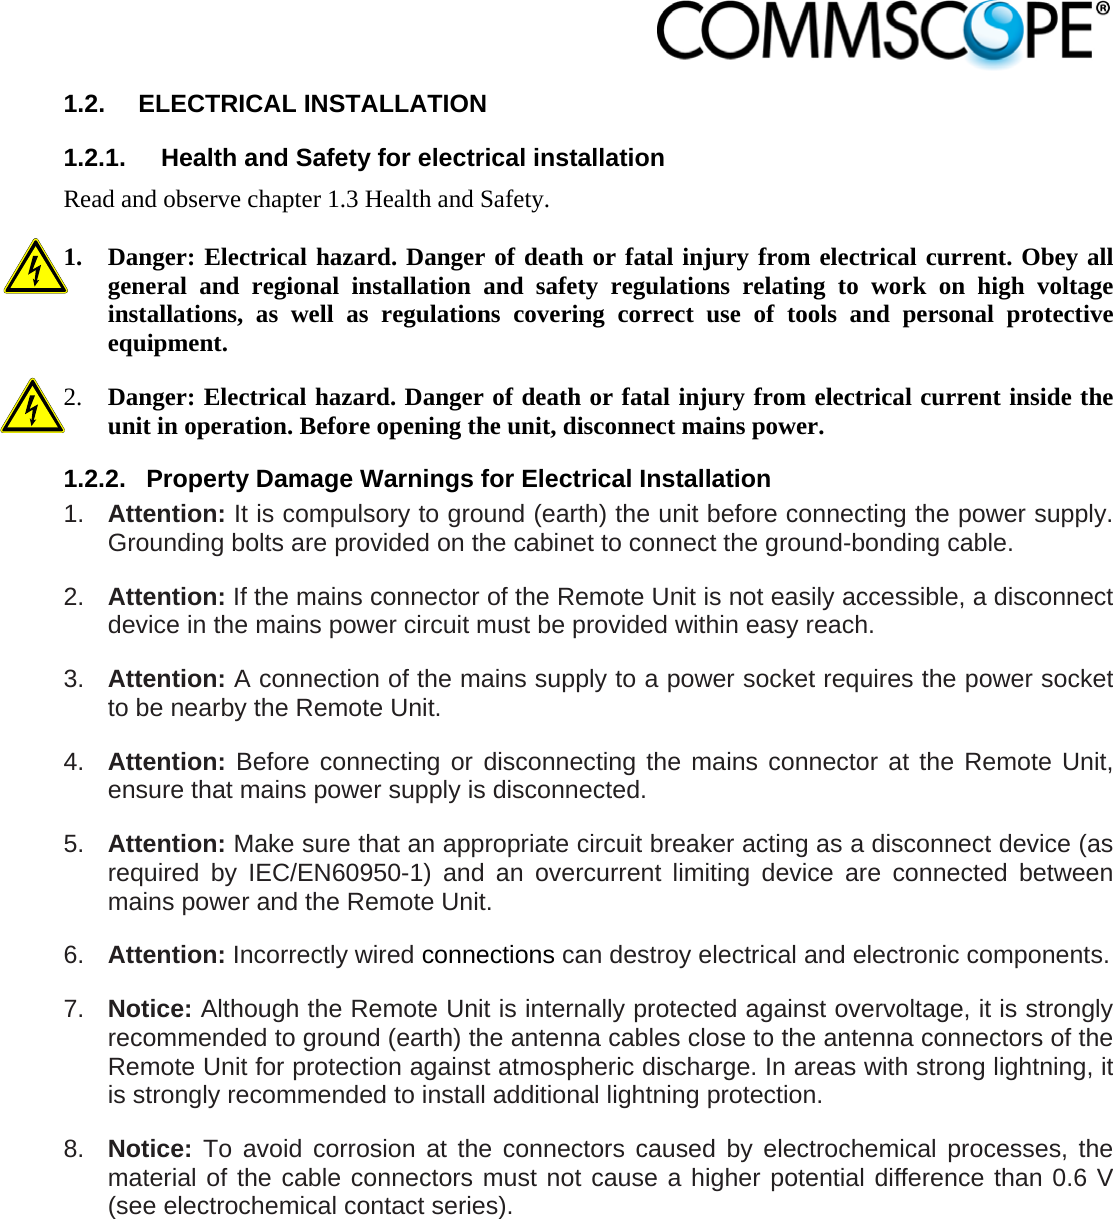                            1.2. ELECTRICAL INSTALLATION 1.2.1.  Health and Safety for electrical installation Read and observe chapter 1.3 Health and Safety.  1. Danger: Electrical hazard. Danger of death or fatal injury from electrical current. Obey all general and regional installation and safety regulations relating to work on high voltage installations, as well as regulations covering correct use of tools and personal protective equipment. 2. Danger: Electrical hazard. Danger of death or fatal injury from electrical current inside the unit in operation. Before opening the unit, disconnect mains power. 1.2.2.  Property Damage Warnings for Electrical Installation 1.  Attention: It is compulsory to ground (earth) the unit before connecting the power supply. Grounding bolts are provided on the cabinet to connect the ground-bonding cable. 2.  Attention: If the mains connector of the Remote Unit is not easily accessible, a disconnect device in the mains power circuit must be provided within easy reach. 3.  Attention: A connection of the mains supply to a power socket requires the power socket to be nearby the Remote Unit. 4.  Attention: Before connecting or disconnecting the mains connector at the Remote Unit, ensure that mains power supply is disconnected. 5.  Attention: Make sure that an appropriate circuit breaker acting as a disconnect device (as required by IEC/EN60950-1) and an overcurrent limiting device are connected between mains power and the Remote Unit. 6.  Attention: Incorrectly wired connections can destroy electrical and electronic components.  7.  Notice: Although the Remote Unit is internally protected against overvoltage, it is strongly recommended to ground (earth) the antenna cables close to the antenna connectors of the Remote Unit for protection against atmospheric discharge. In areas with strong lightning, it is strongly recommended to install additional lightning protection. 8.  Notice: To avoid corrosion at the connectors caused by electrochemical processes, the material of the cable connectors must not cause a higher potential difference than 0.6 V (see electrochemical contact series). 